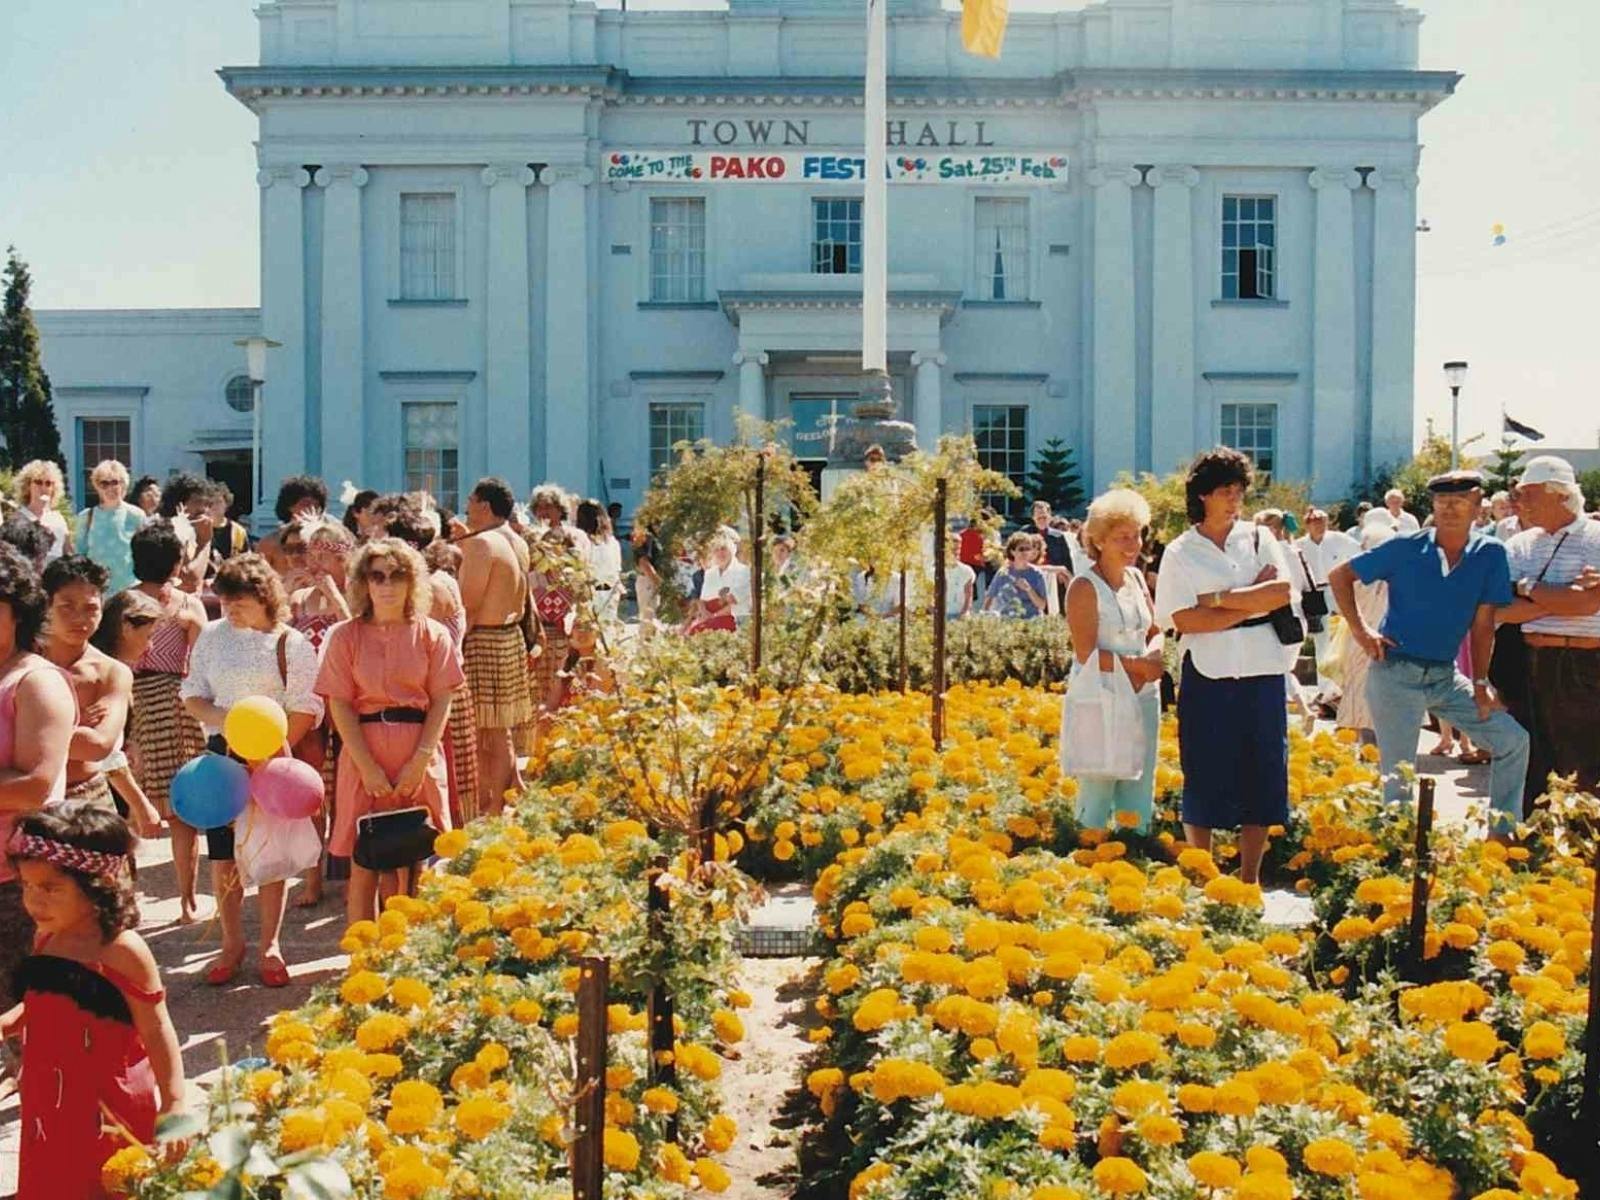 crowd photo outside Geelong West Town hall with yellow flowers.